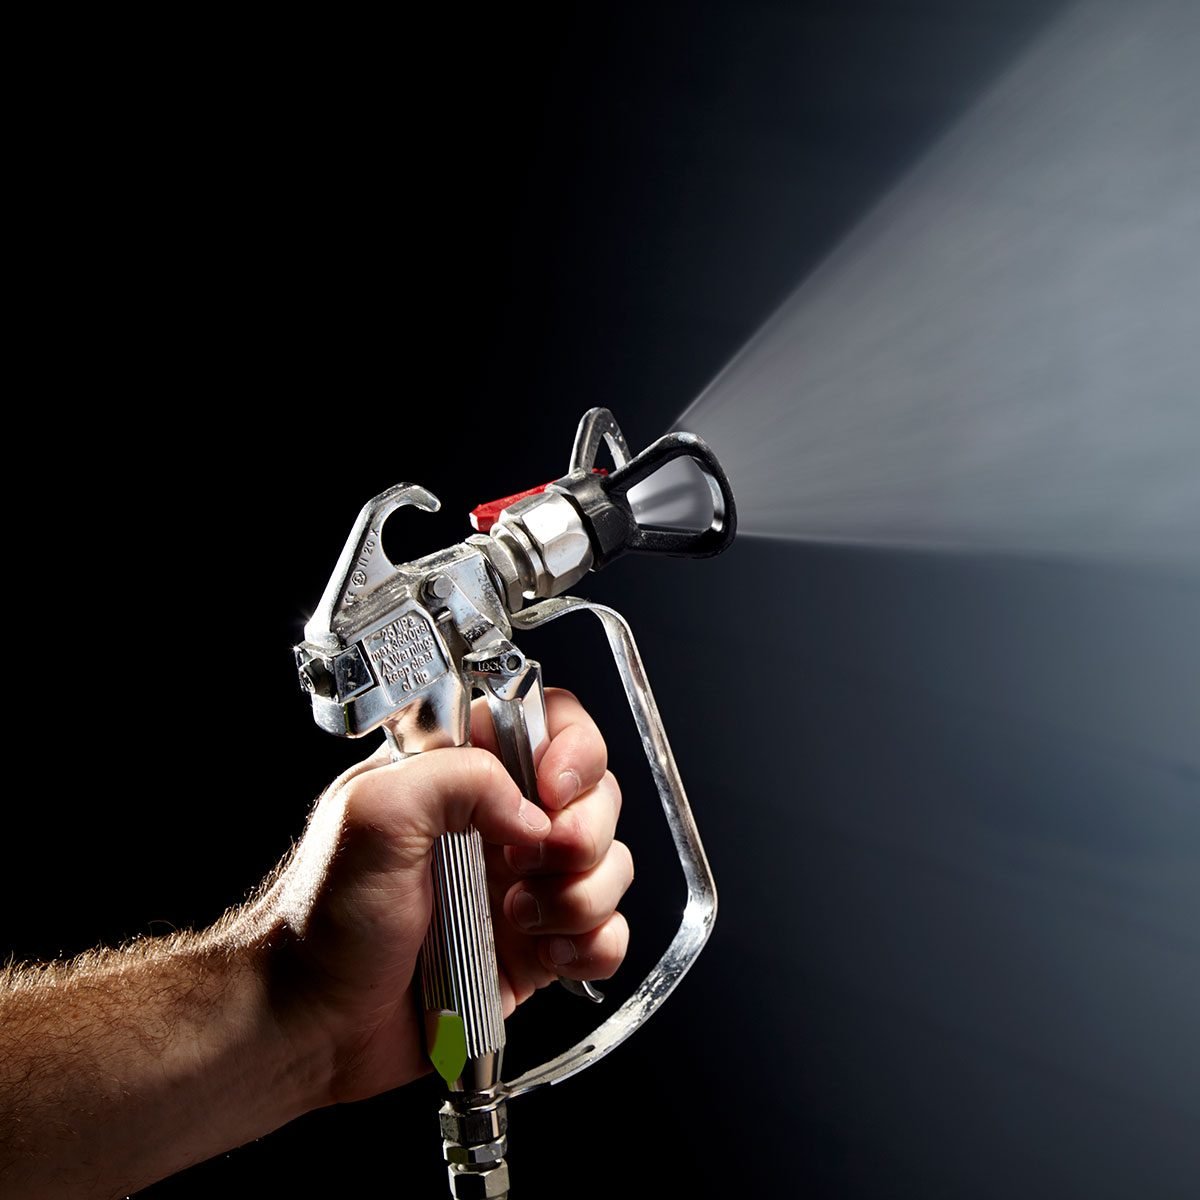 Best Paint Sprayers for Every Home Project - In Honor Of Design